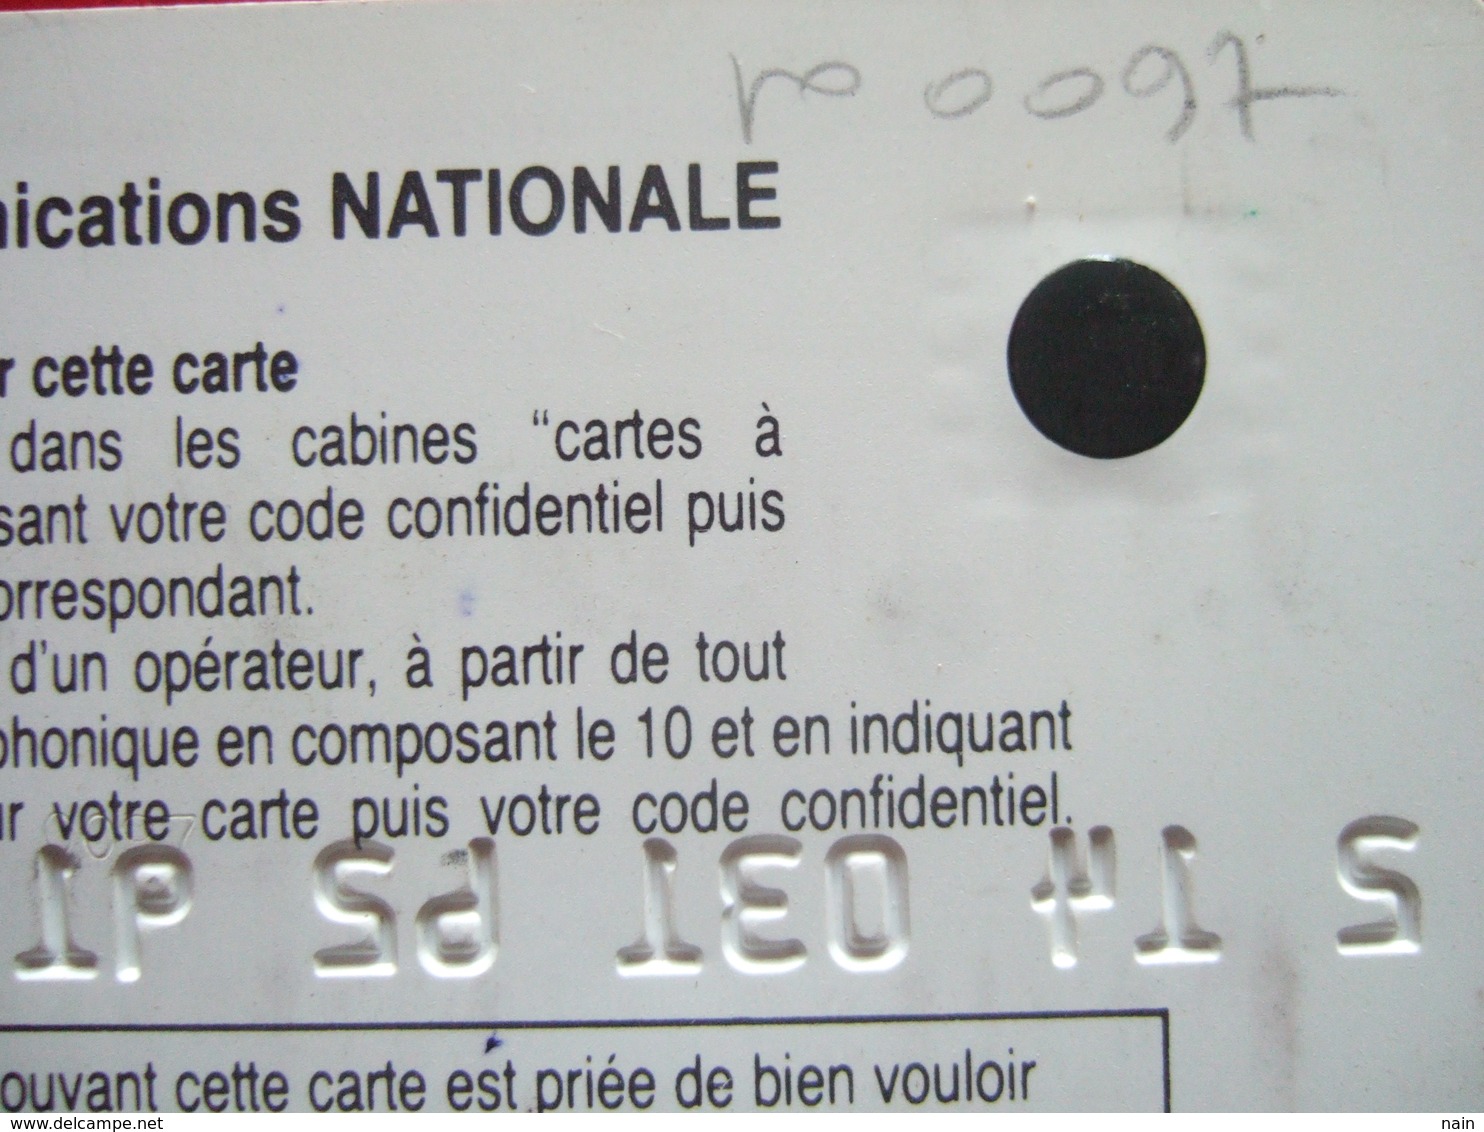 NATIONALE - PUCE SC 3 - IMPRESSION OFSET - 15 N° NOIRS - AU VERSO N° 097 EMBOUTIS - " TRES RARE " ( -  Schede Di Tipo Pastel   